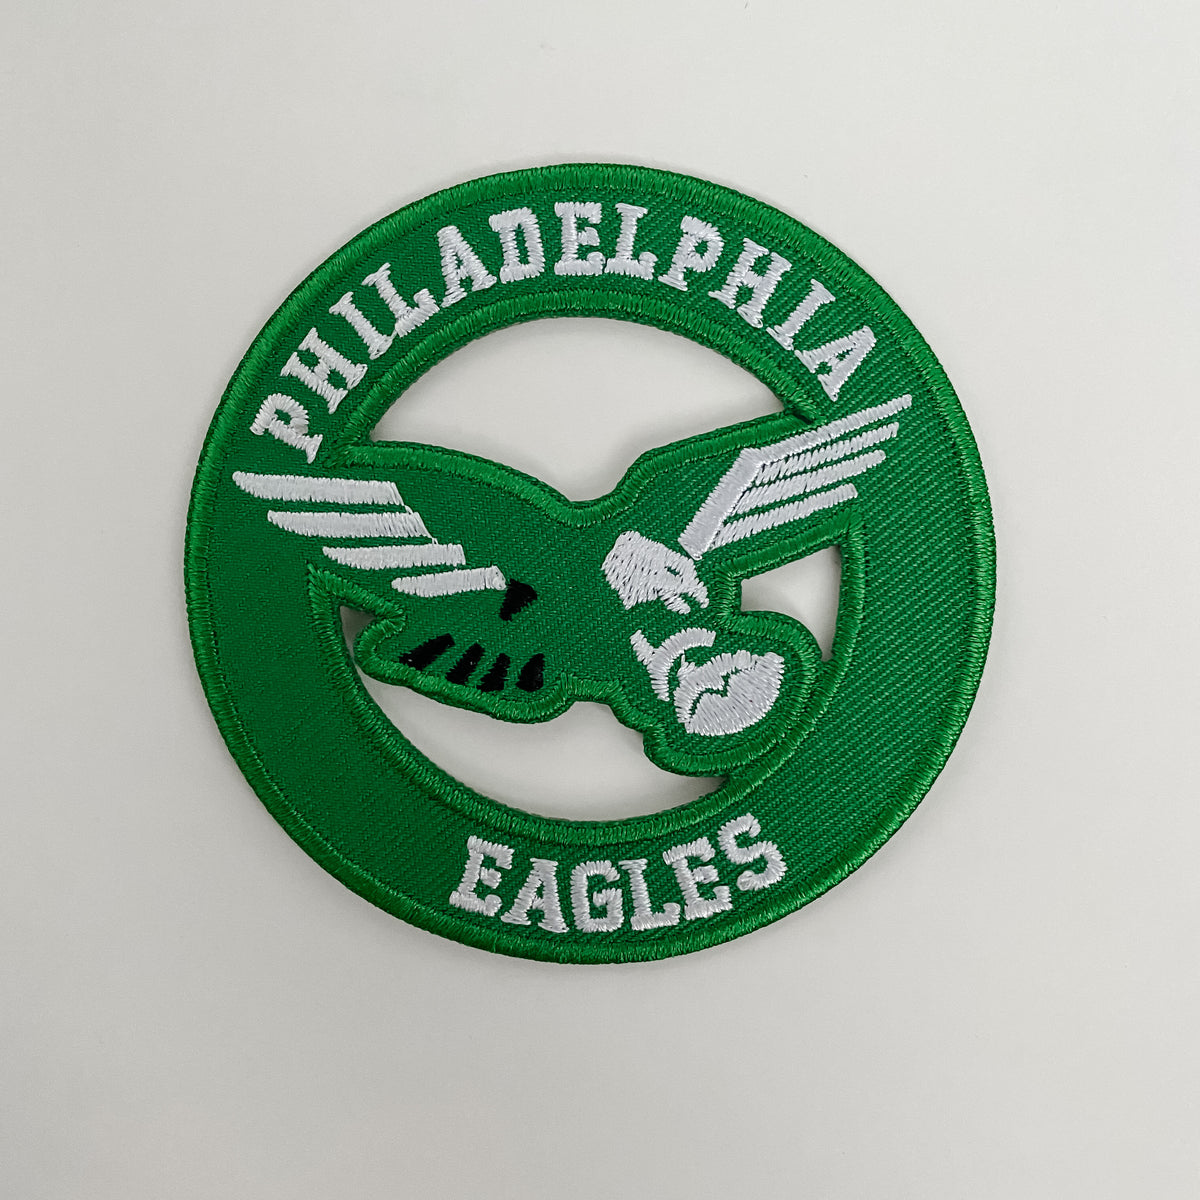 1 PHILADELPHIA EAGLES 2 NFL FOOTBALL PATCH – UNITED PATCHES